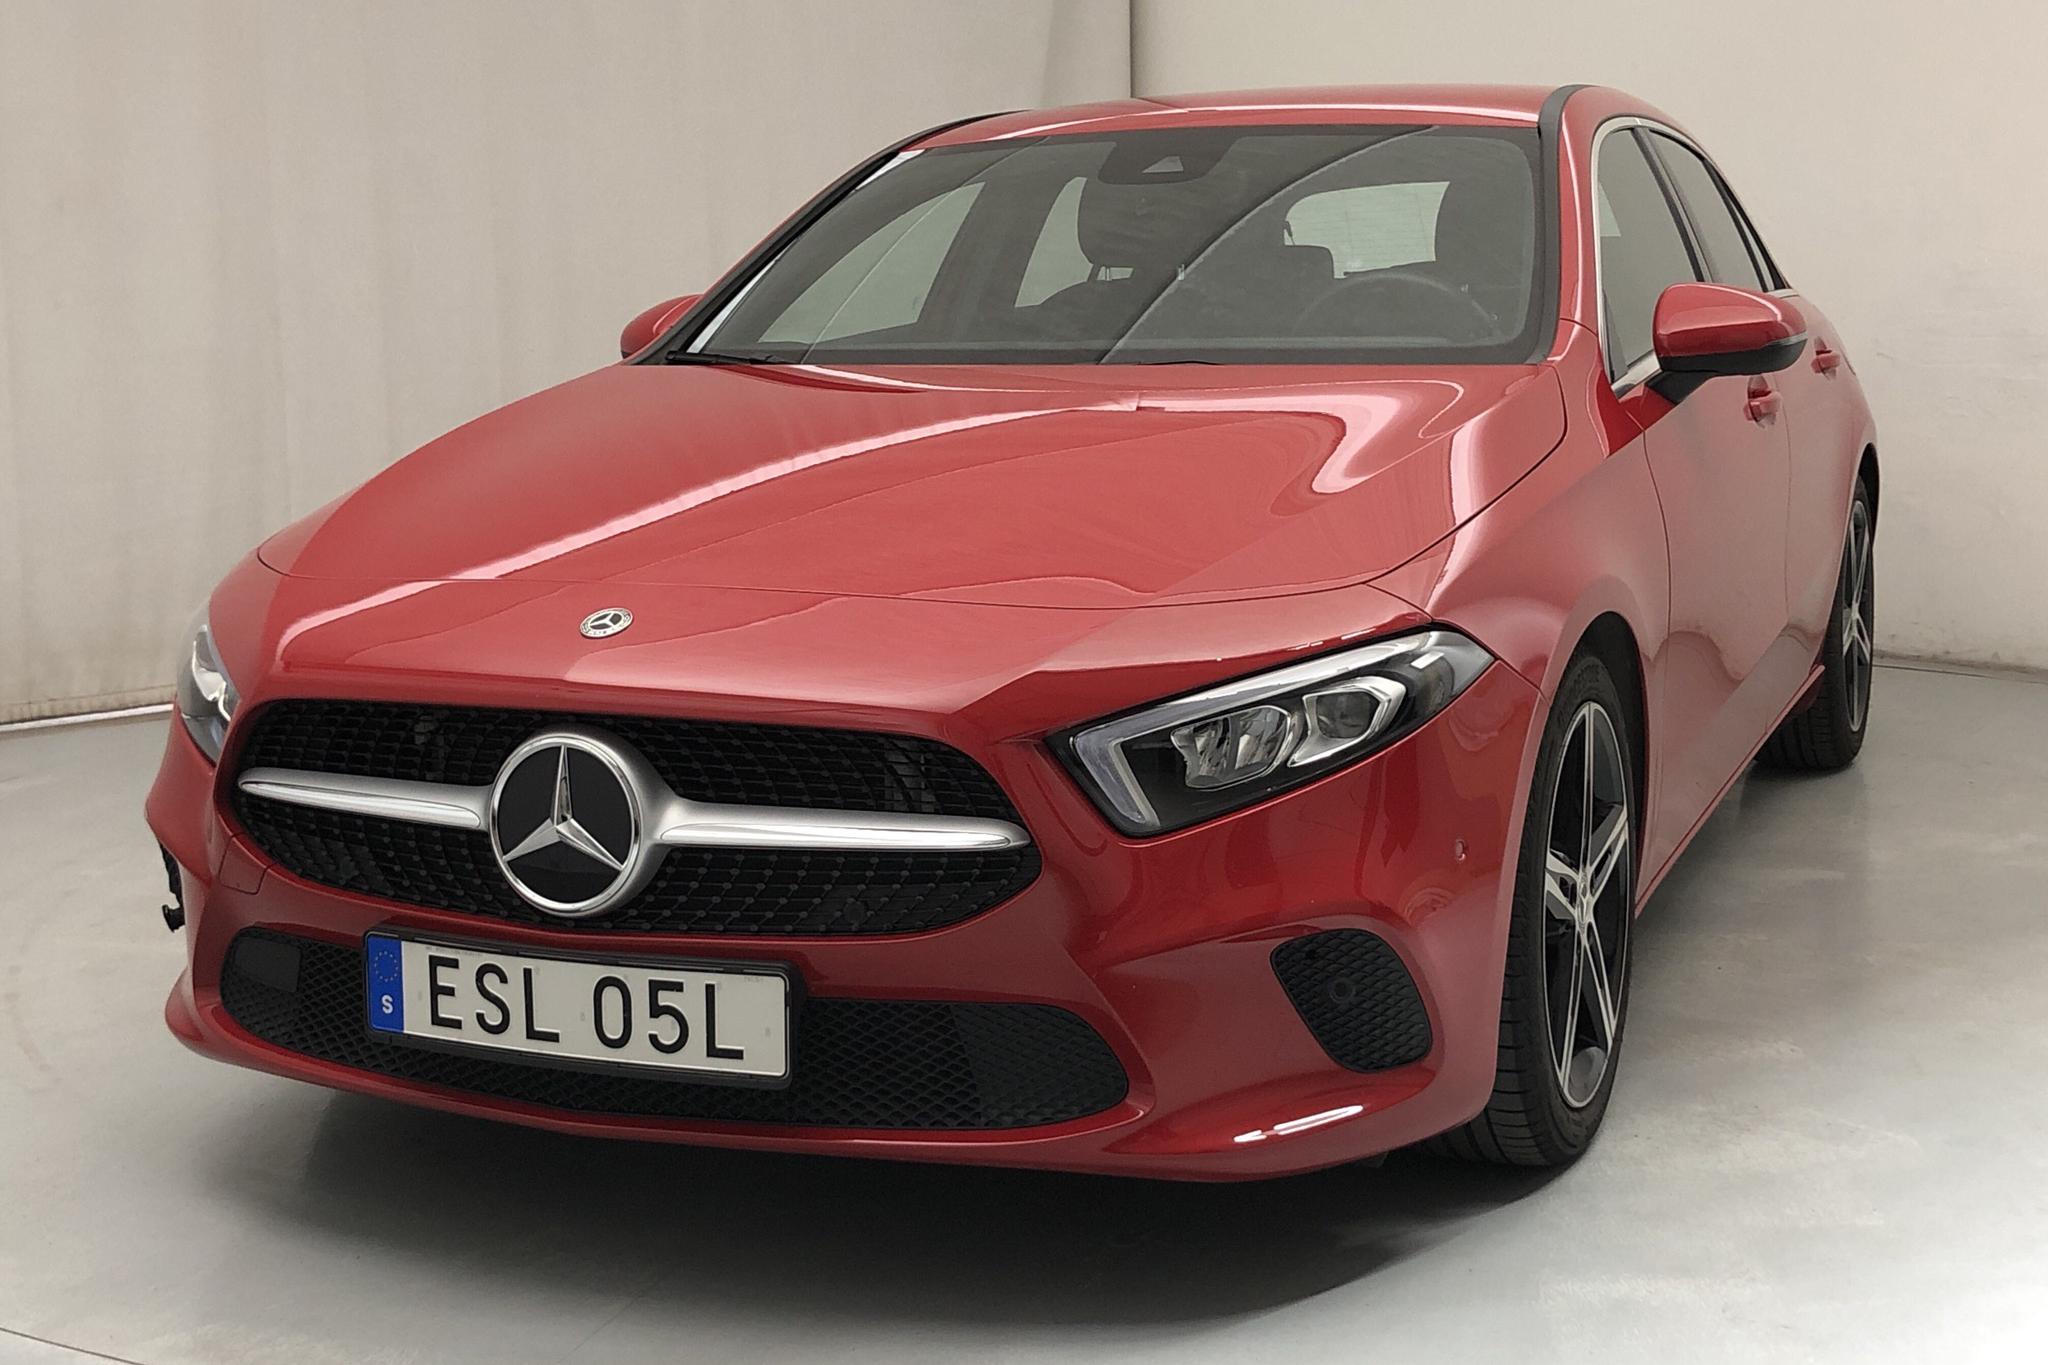 Mercedes A 180 5dr W177 (136hk) - 26 740 km - Automatic - red - 2019